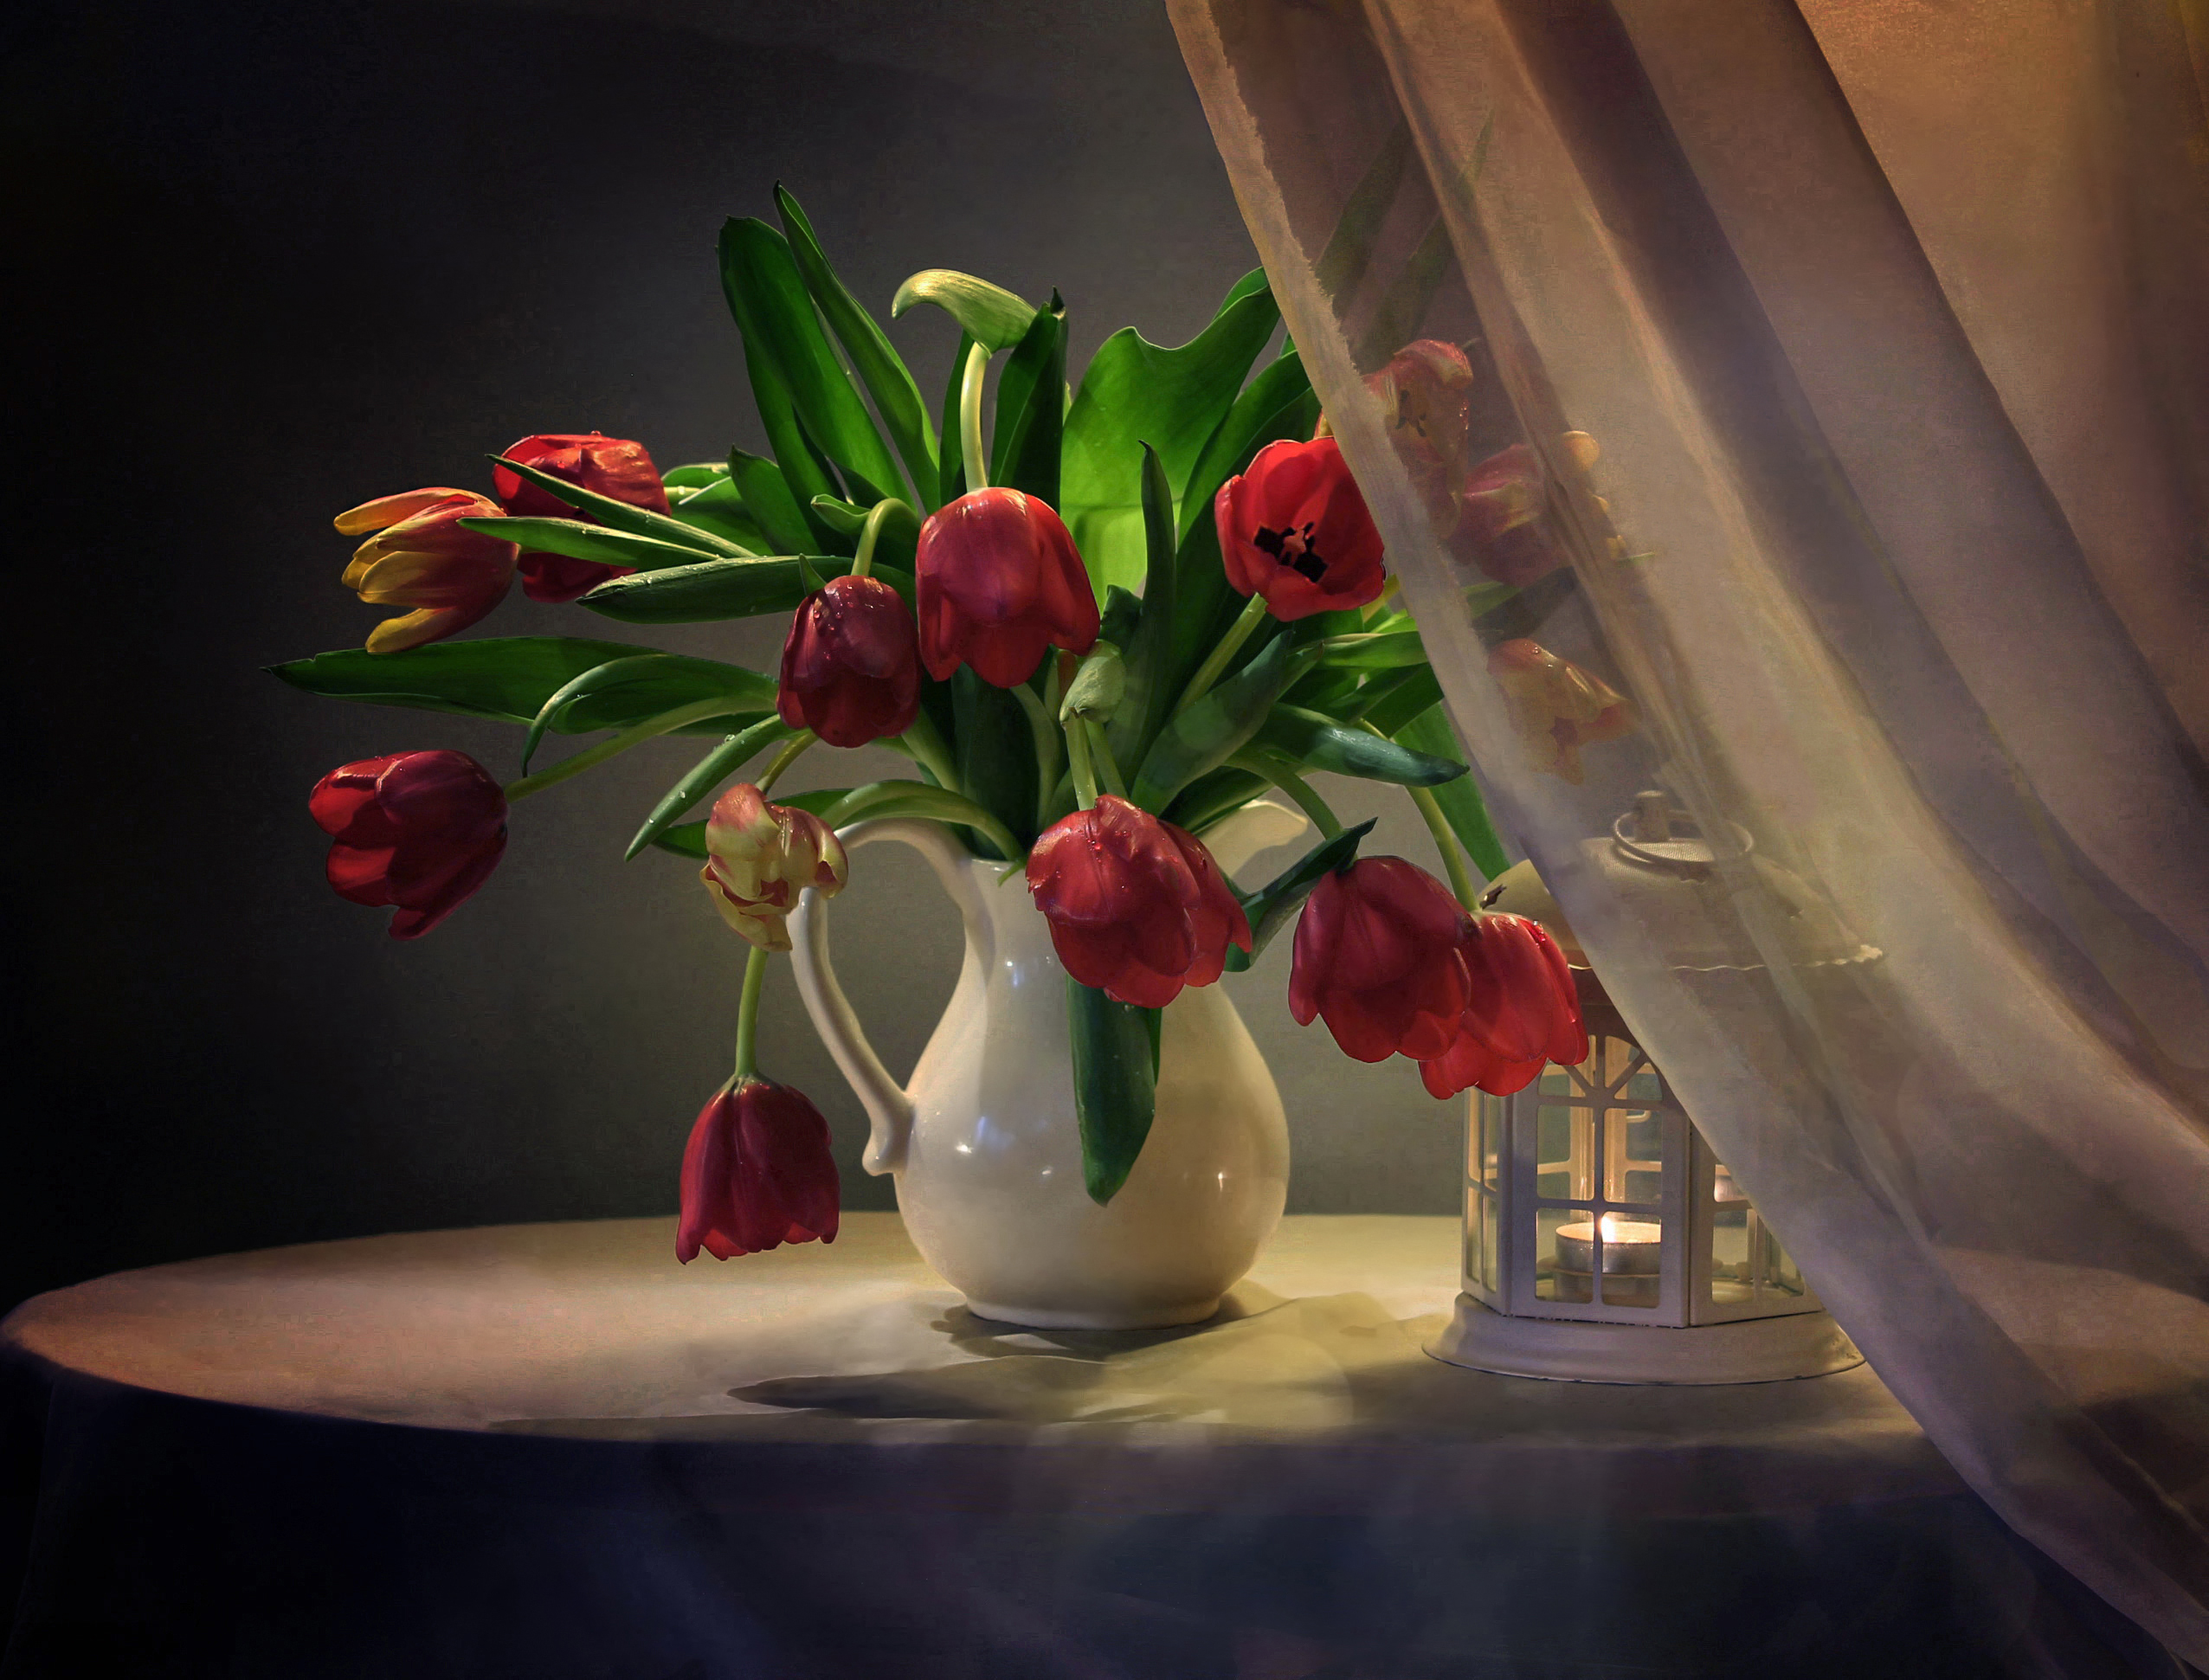 photography, still life, candle, curtain, lantern, red flower, tulip, vase